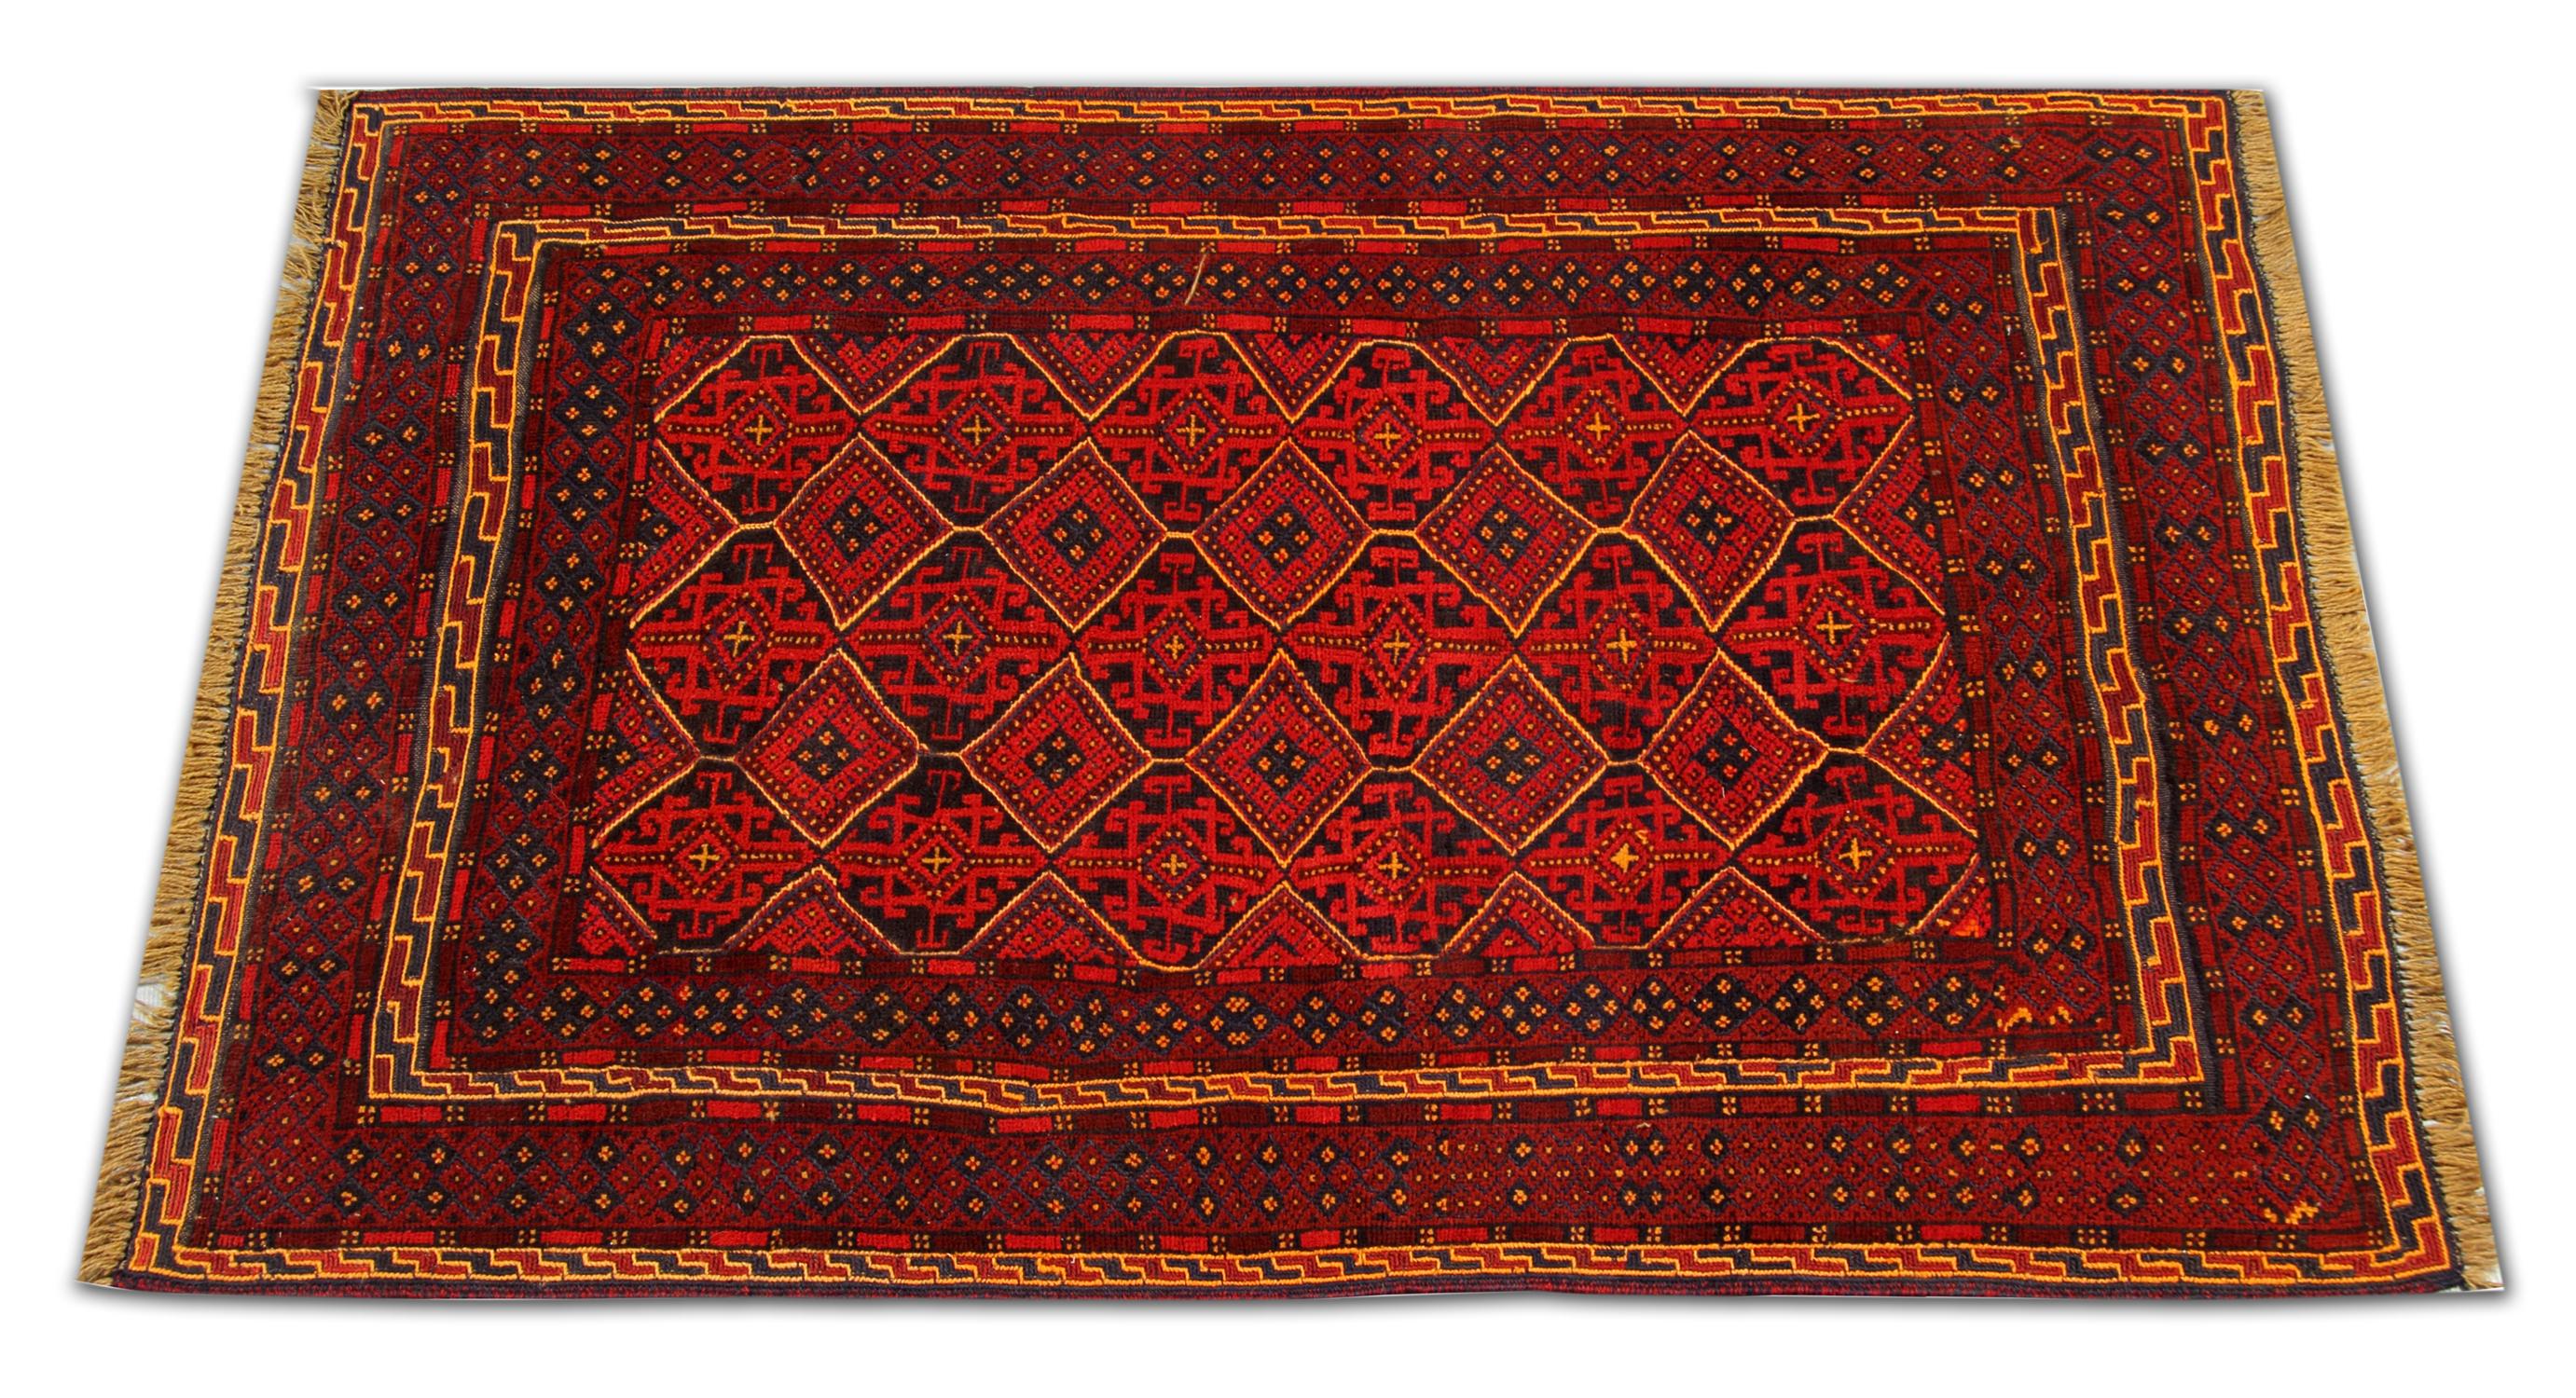 This red wool rug is an example of a fine Afghan rug made by highly skilled Turkmen weavers, known for their exquisite handmade rugs, in the north of Afghanistan. They have used hand-spun wool and 100% organic dyes for the production of these wool